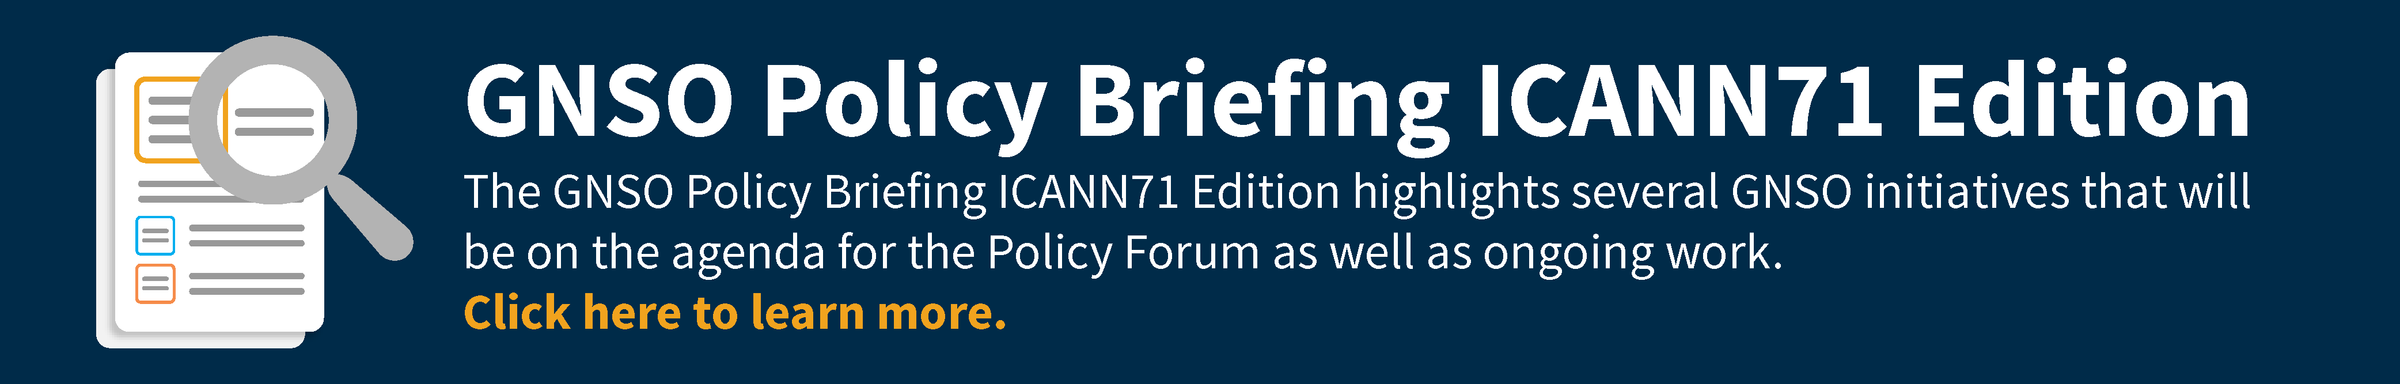 GNSO Policy Briefing ICANN71 Edition